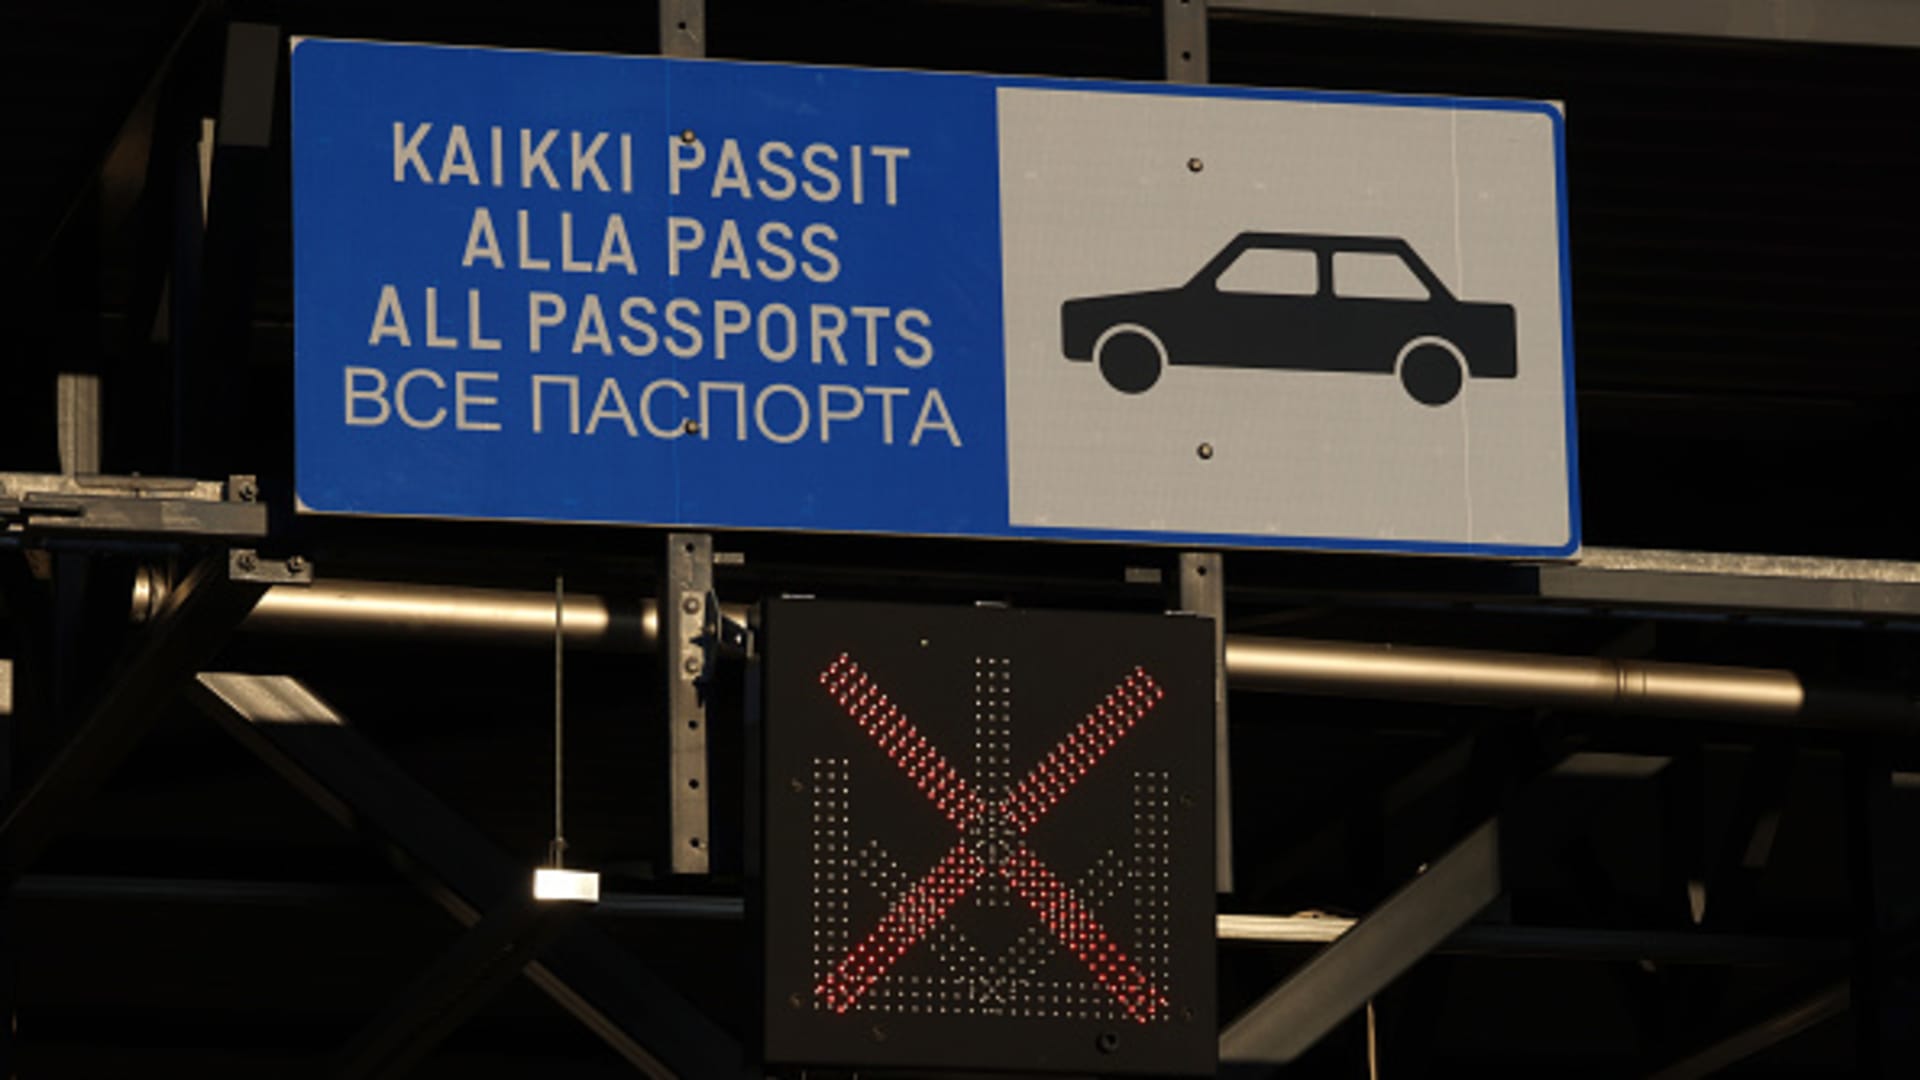 A sign hangs above a passport control at the quiet and nearly empty Imatra border crossing between Finland and Russia on May 24, 2022 near Imatra, Finland.